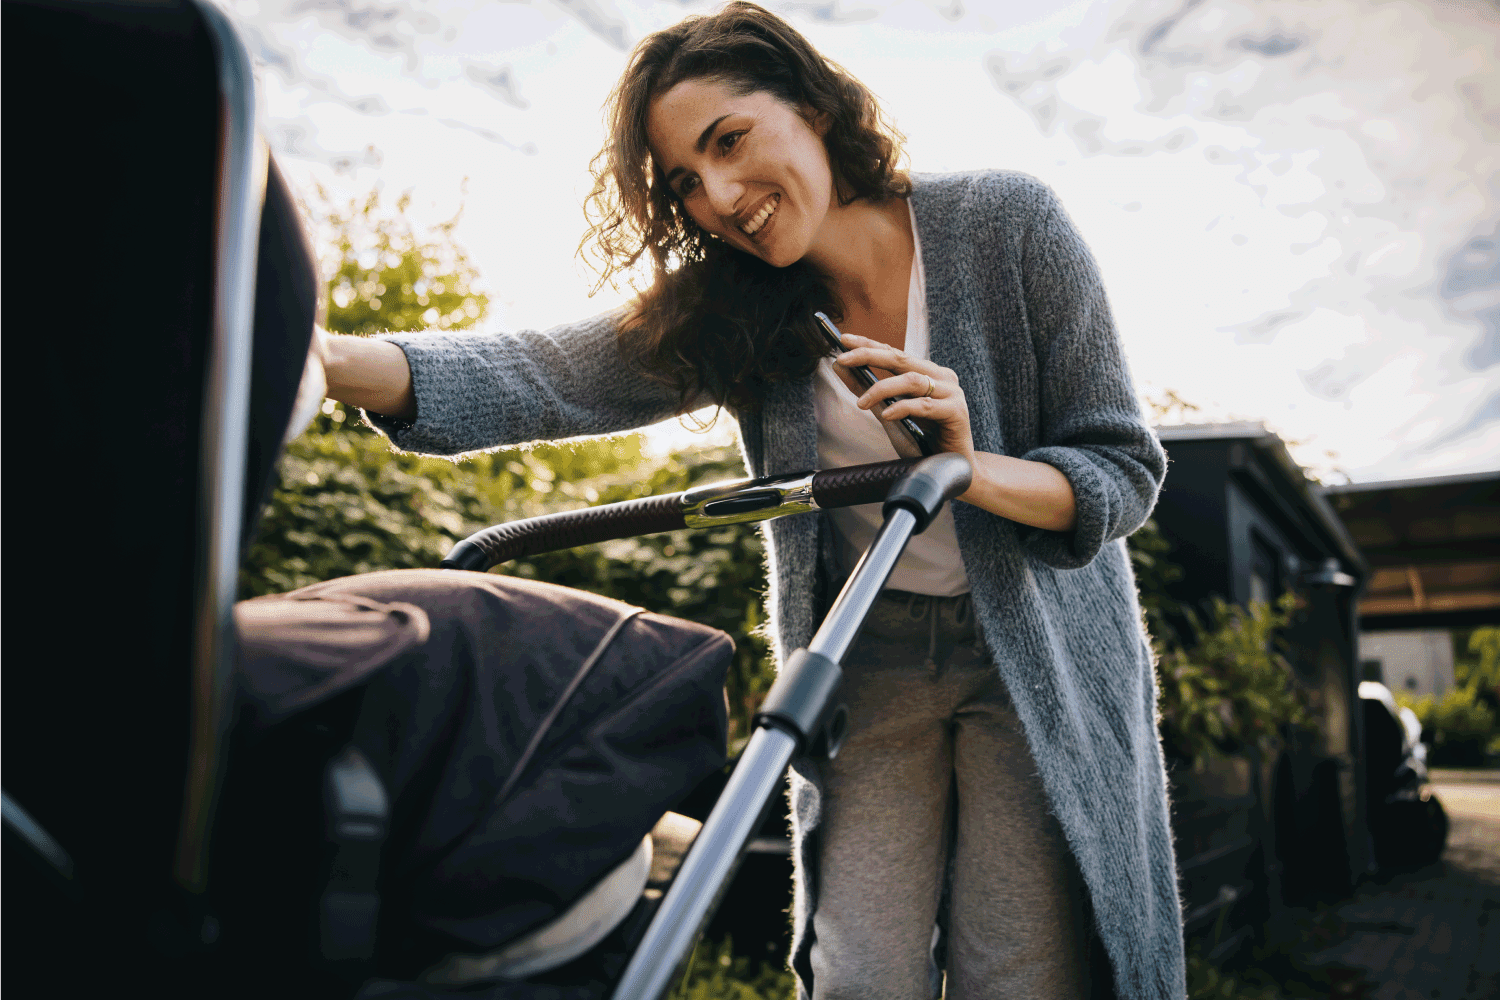 Cheerful mother pushing a stroller and looking at her baby. Happy mother with stroller outdoors.